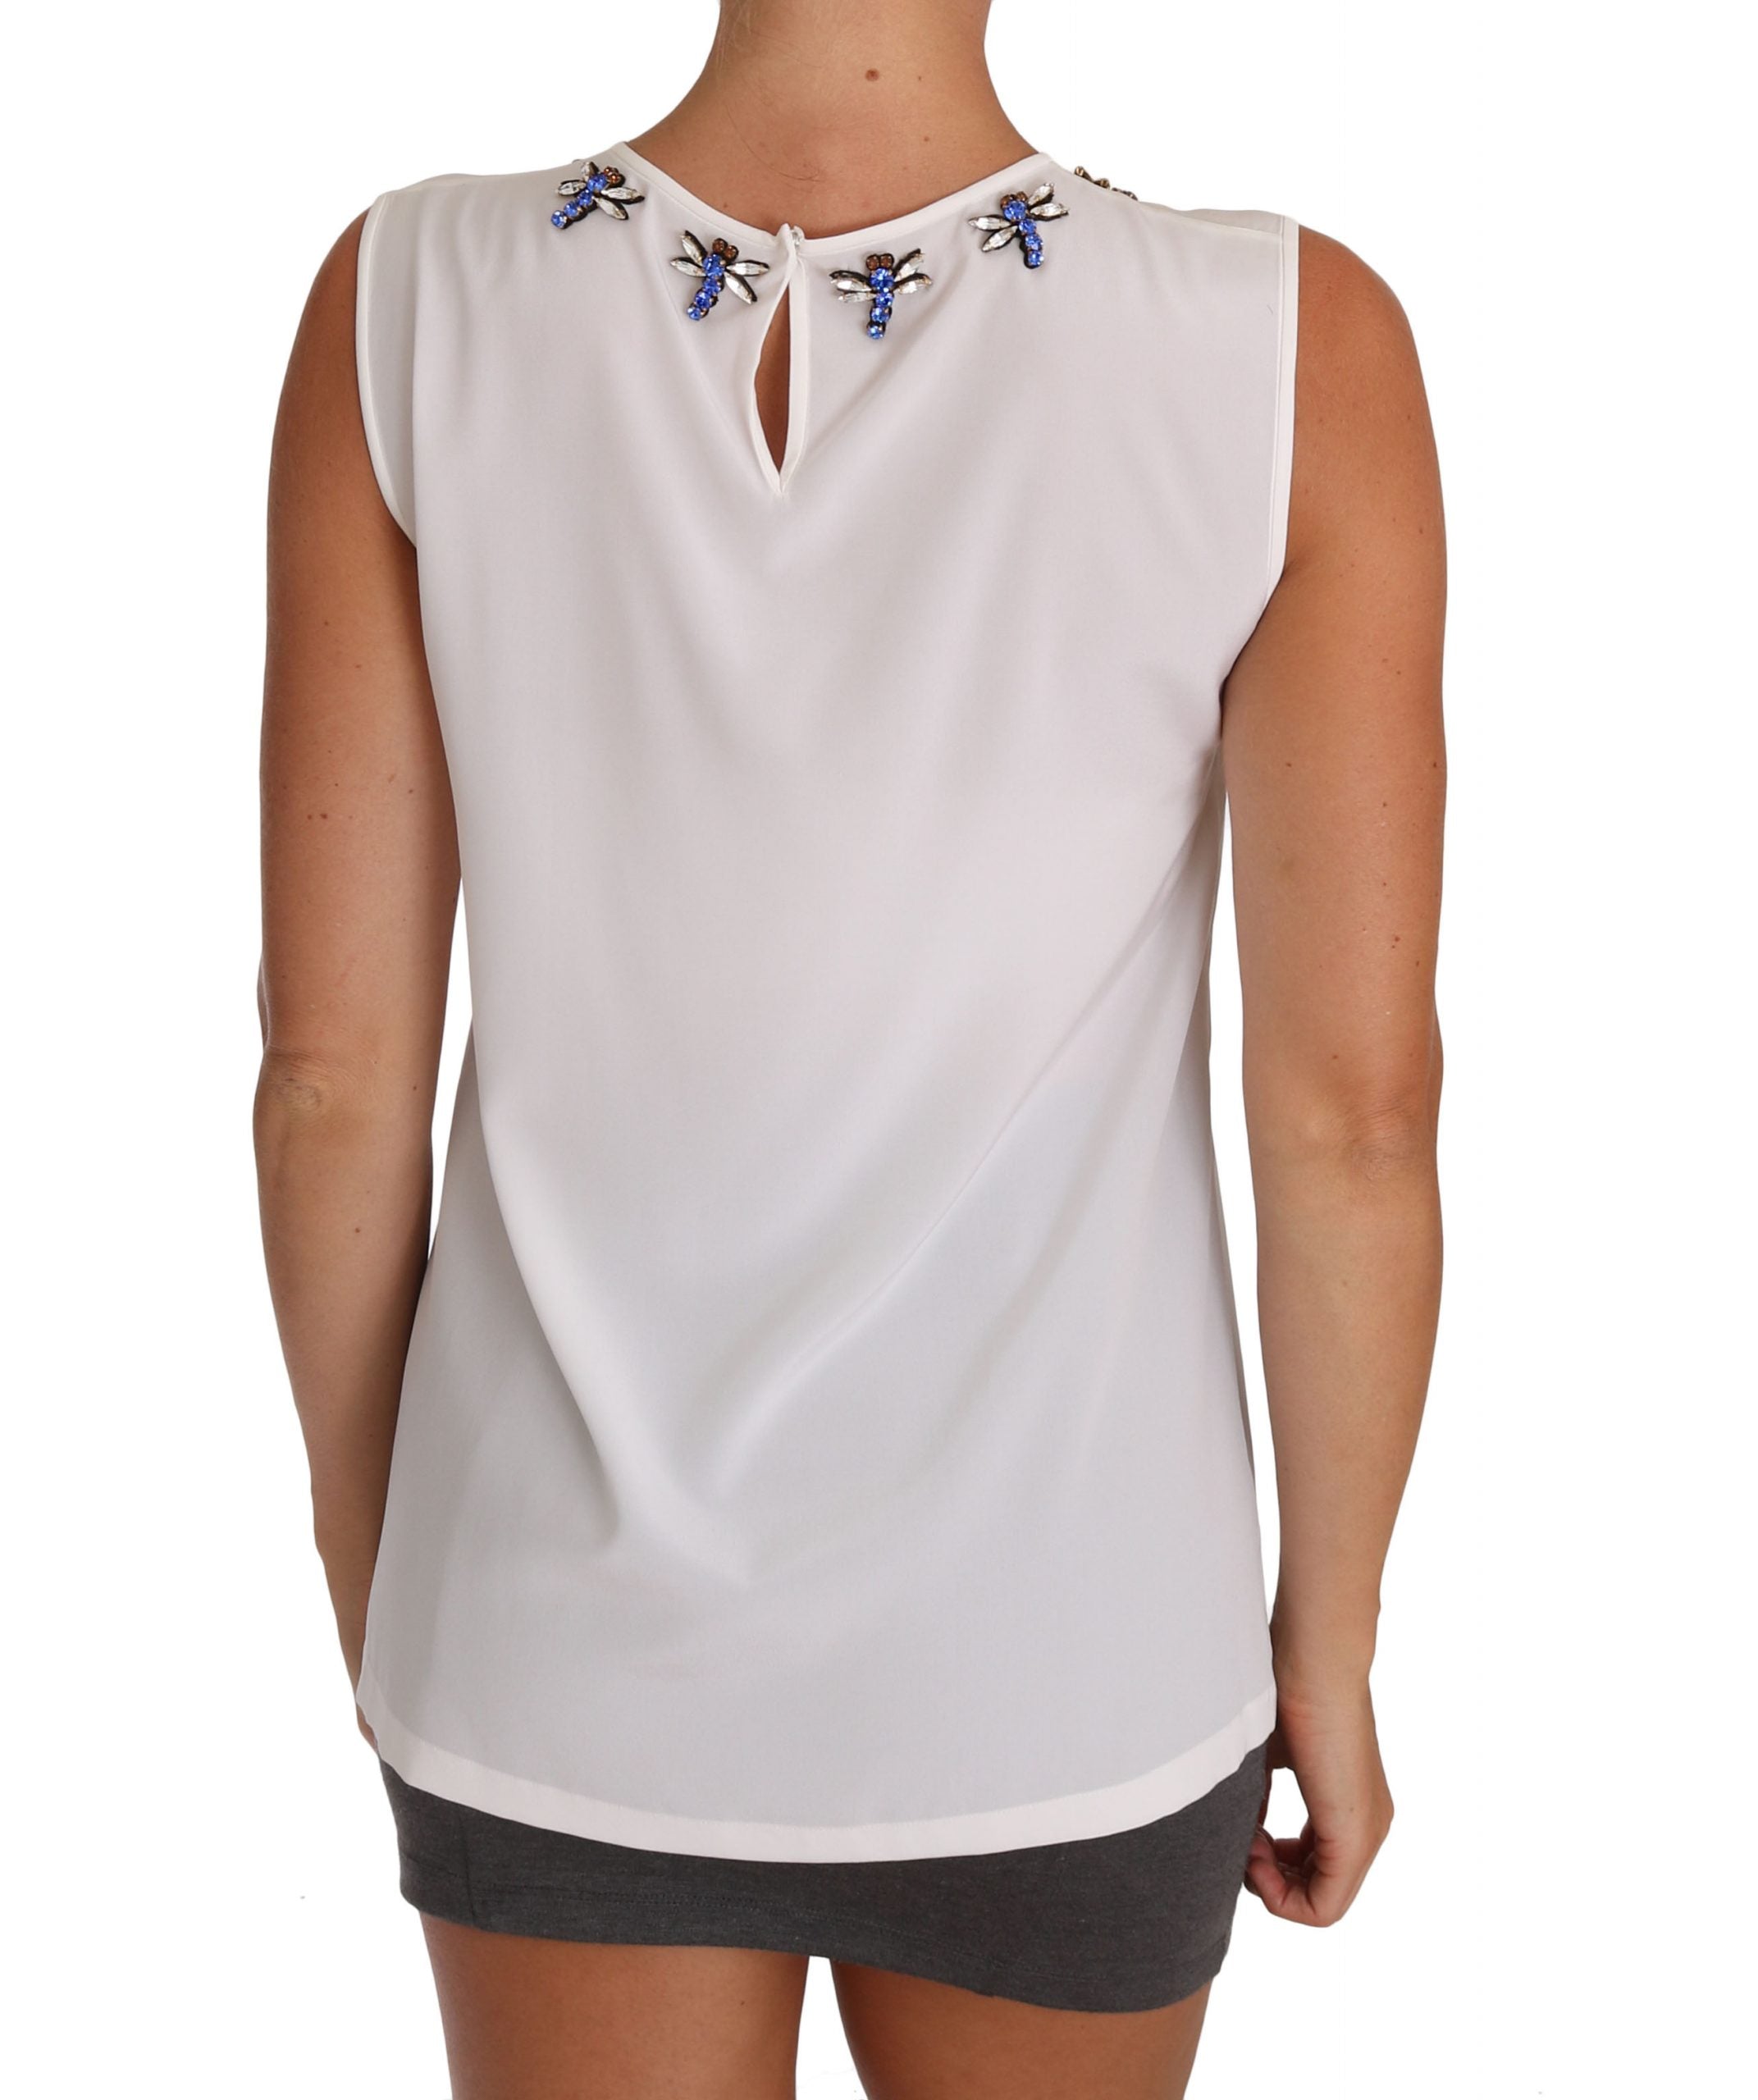 Buy White Silk Crystal Embellished Fly T-shirt by Dolce & Gabbana